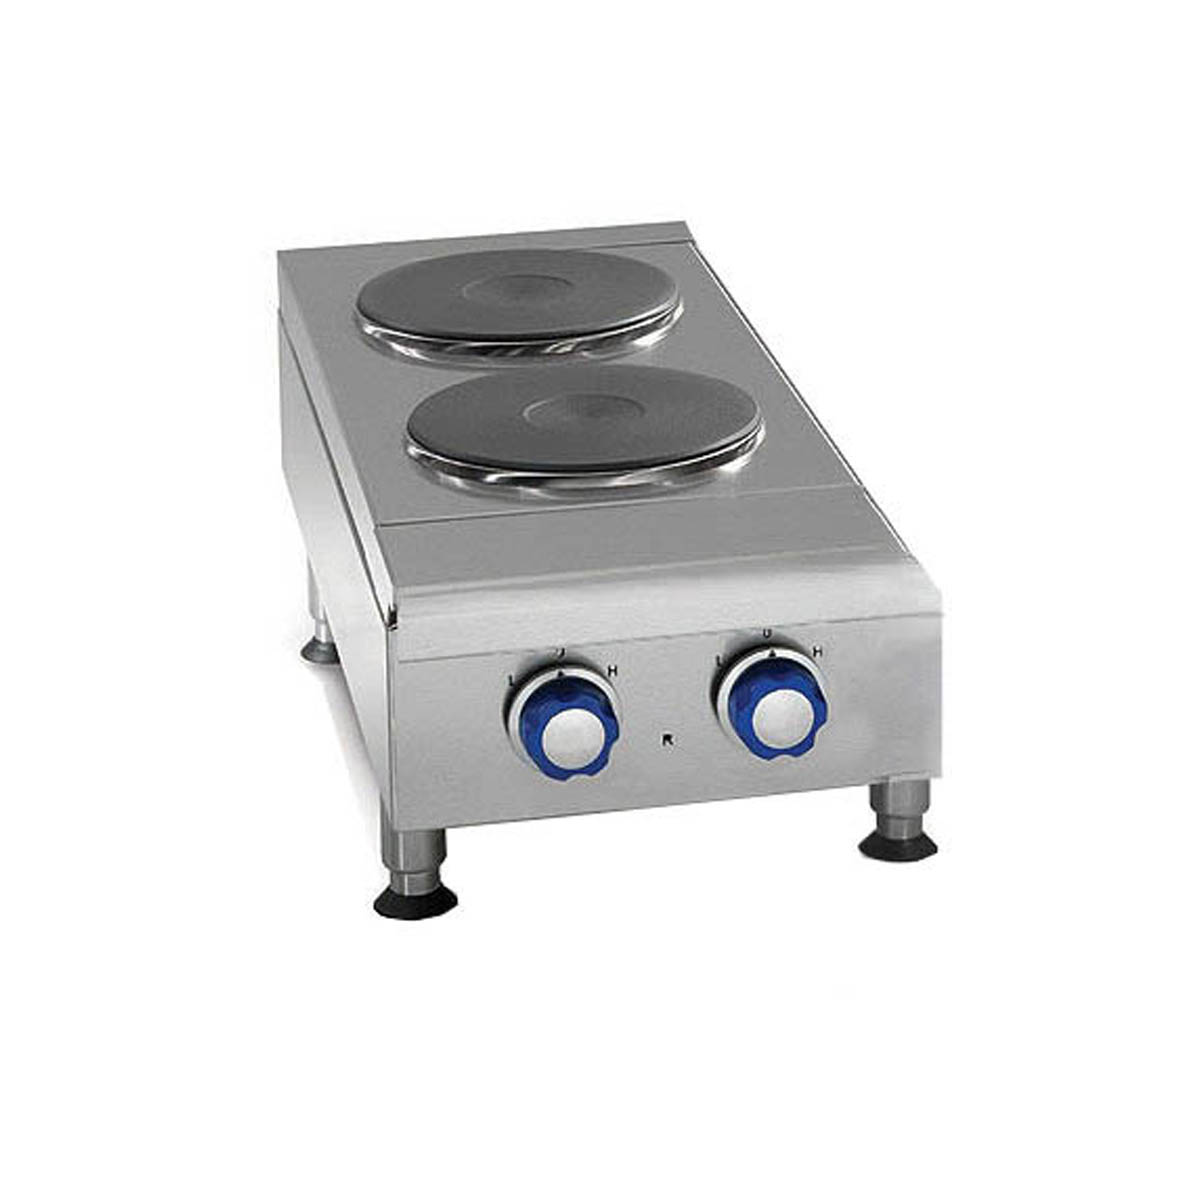 Imperial IHPA-2-12-E Electric Countertop Hotplate